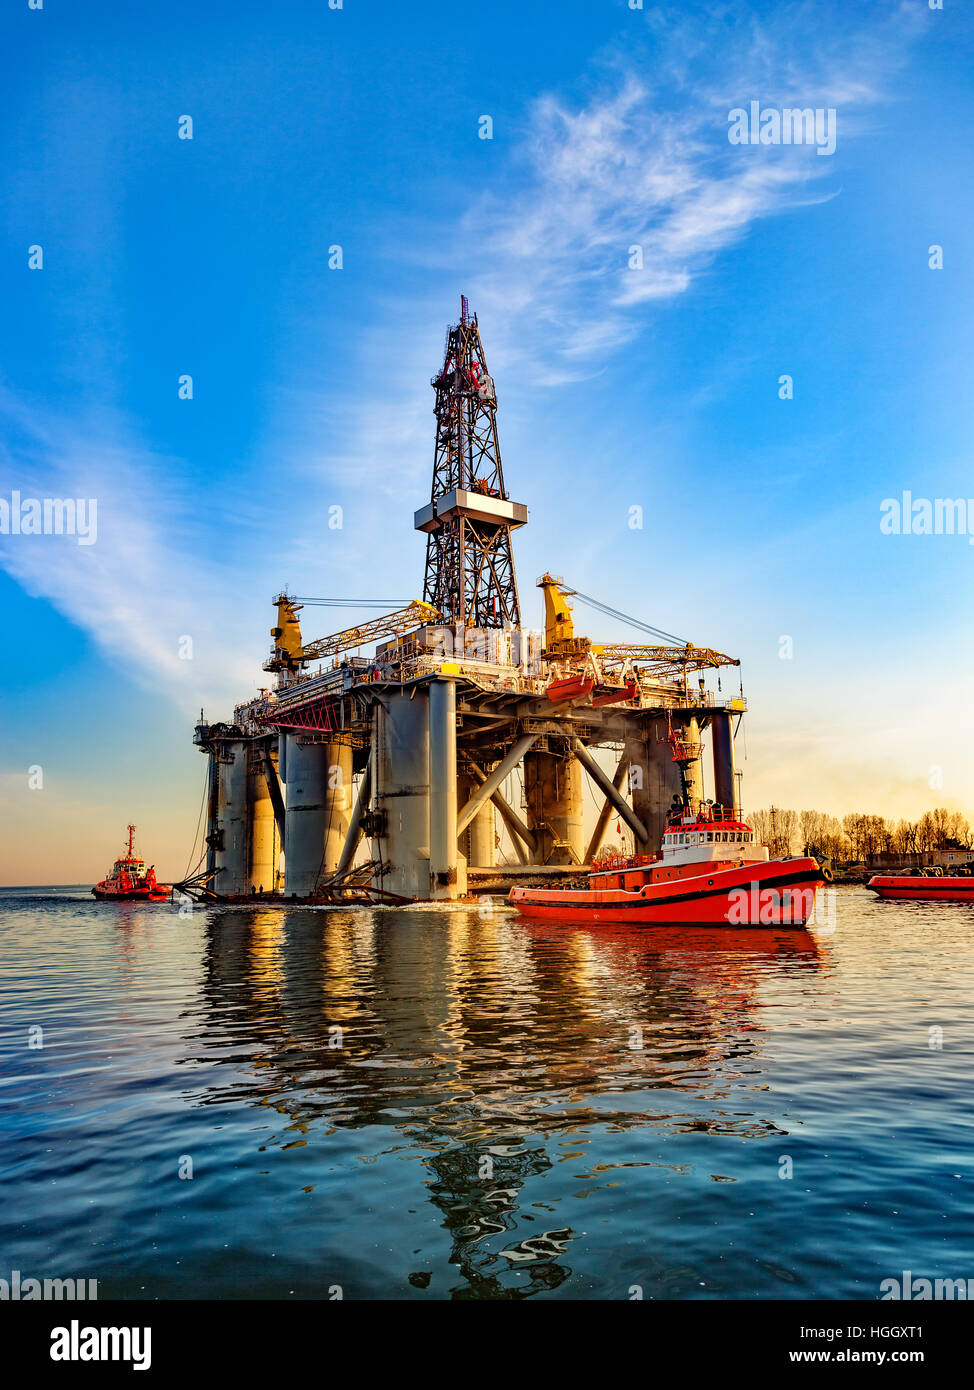 Towing Oil Rig in the Port of Gdansk, Poland. Stock Photo